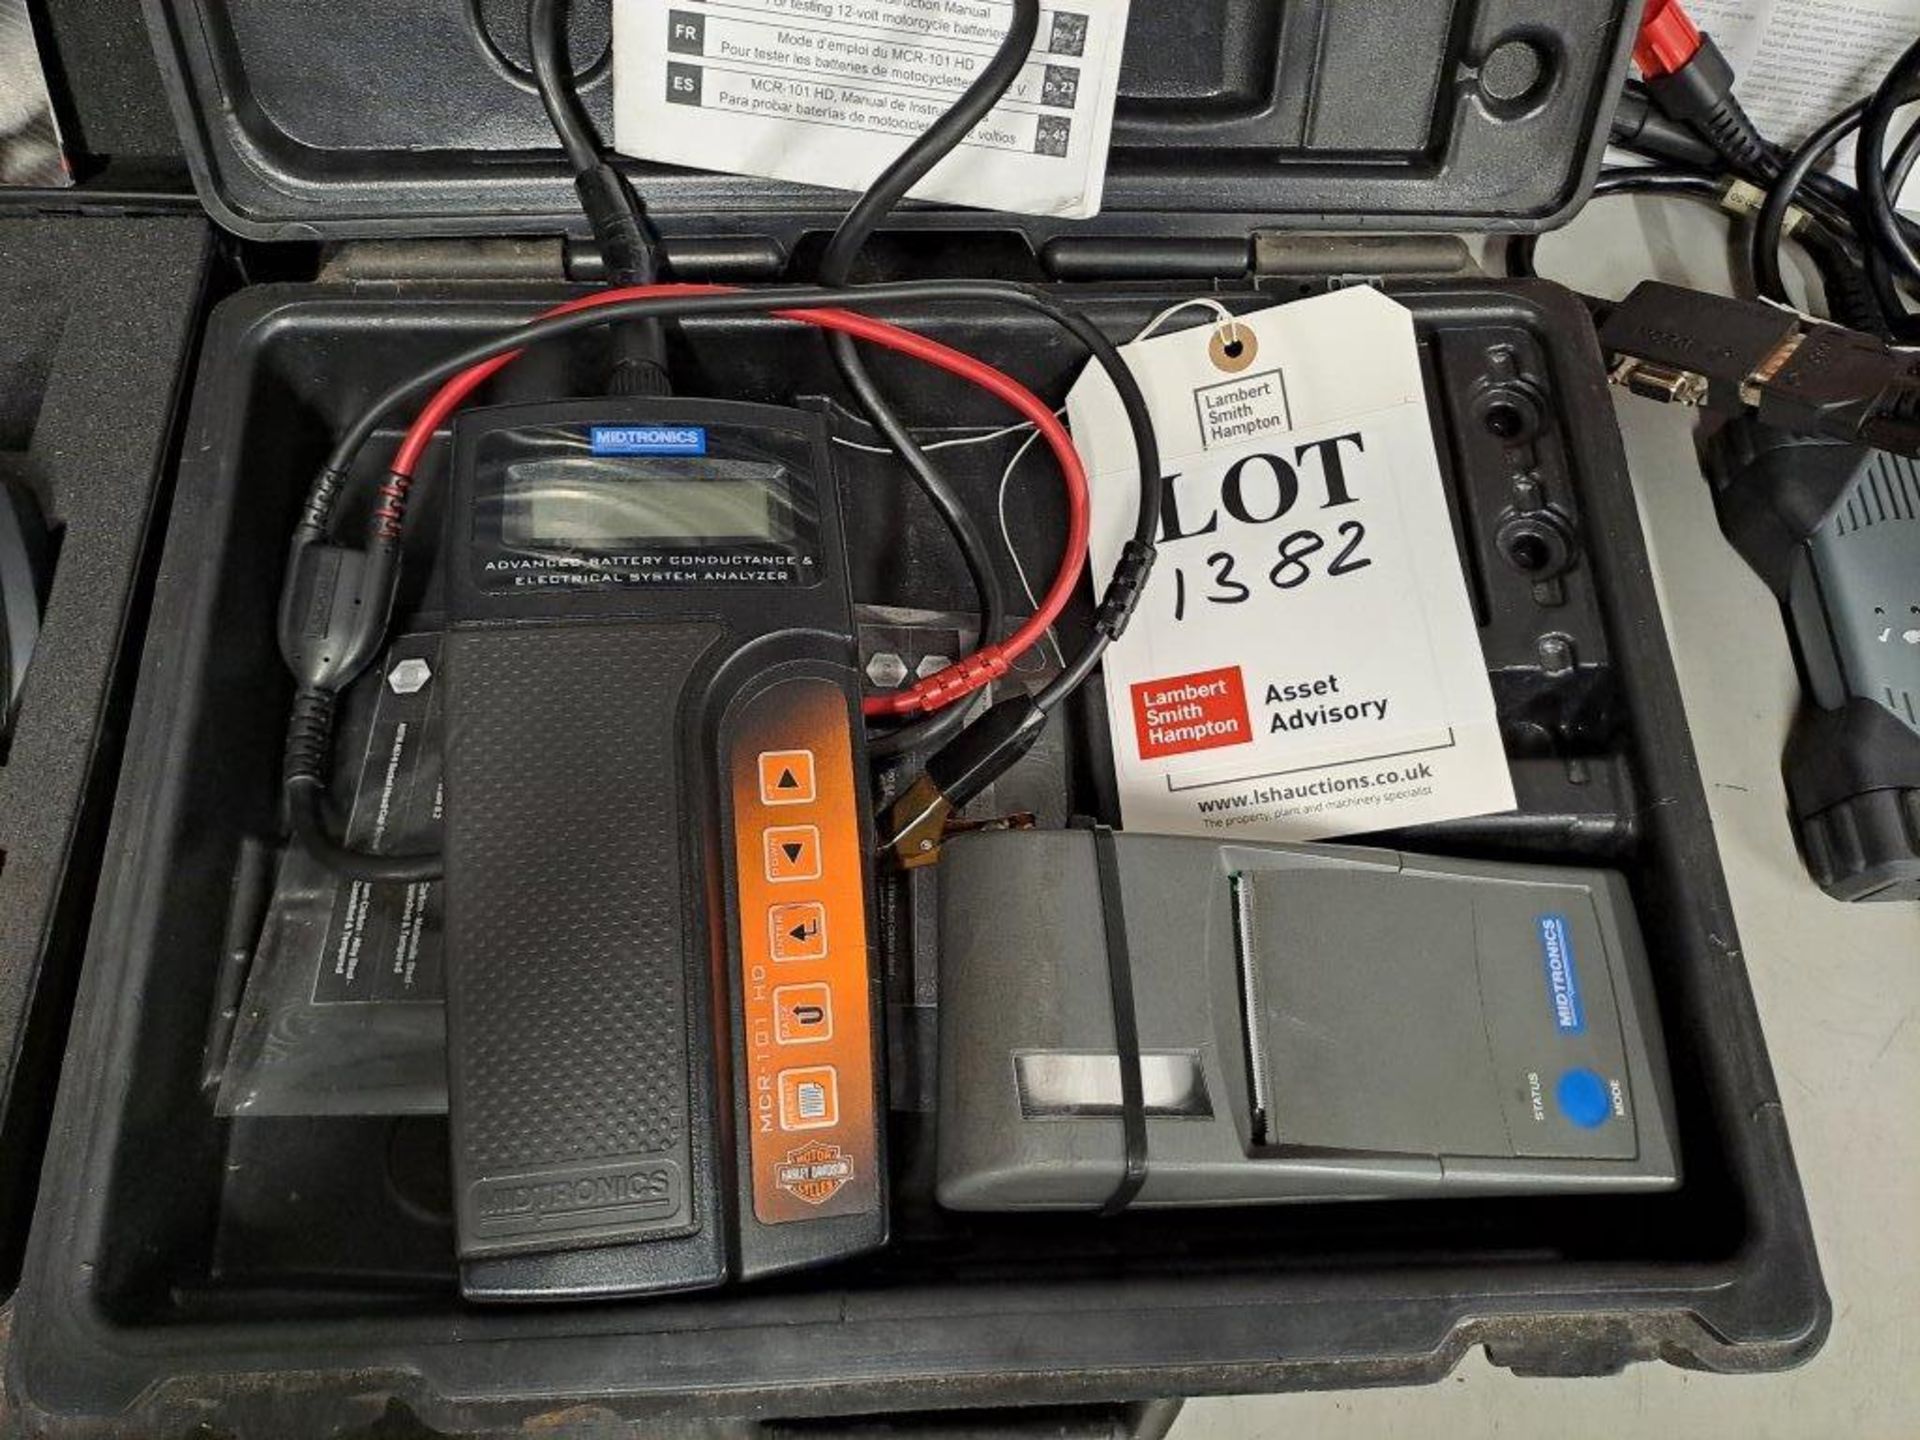 Harley Davidson Midtronic Advanced Battery Copnductance & Electrical Systems Analyser, With Printer - Image 2 of 4